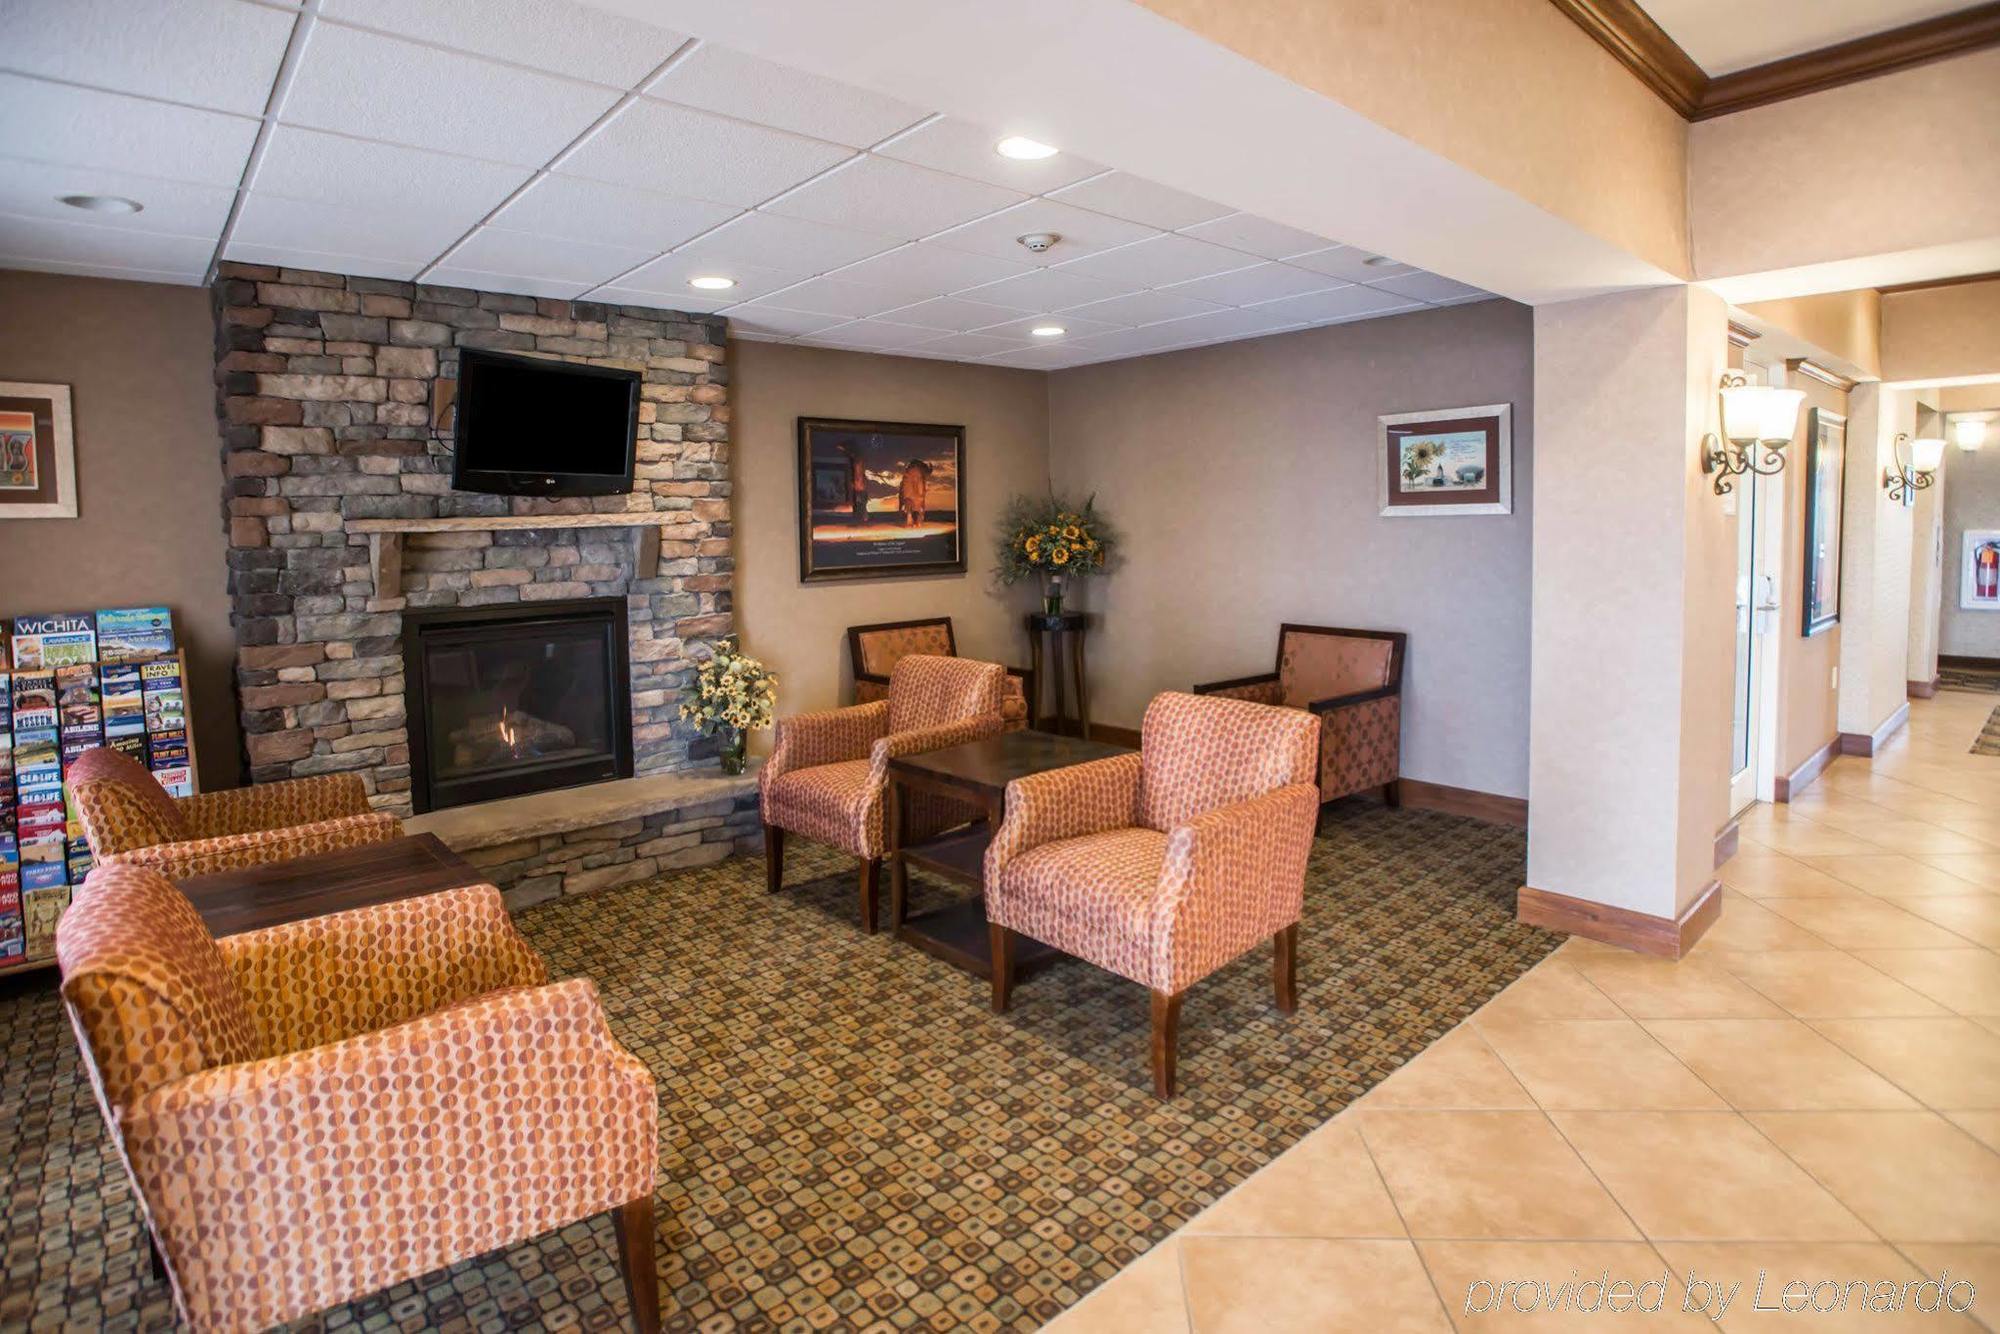 HOTEL SLEEP INN & SUITES OAKLEY I-70 OAKLEY, KS 3* (United States) - from  US$ 100 | BOOKED